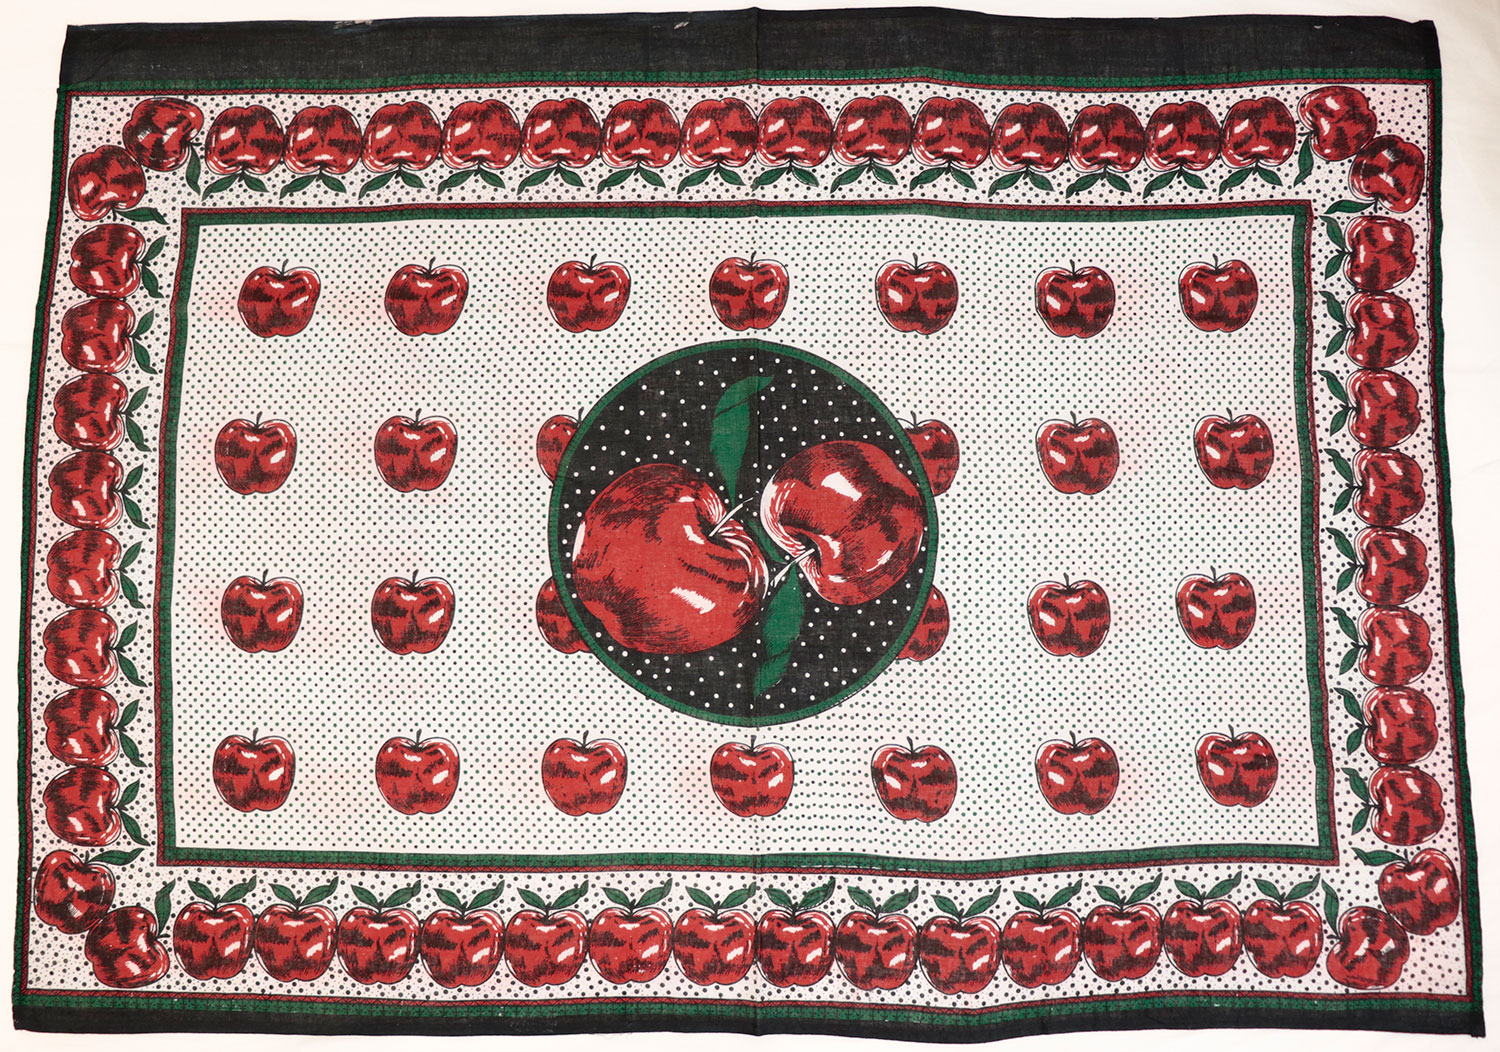 Capulana featuring a pattern of red apple motifs on a spotted white ground with a large central circular motif, enclosed in a rectangular border: Africa, Southern Africa, Mozambique, 1994-2000.